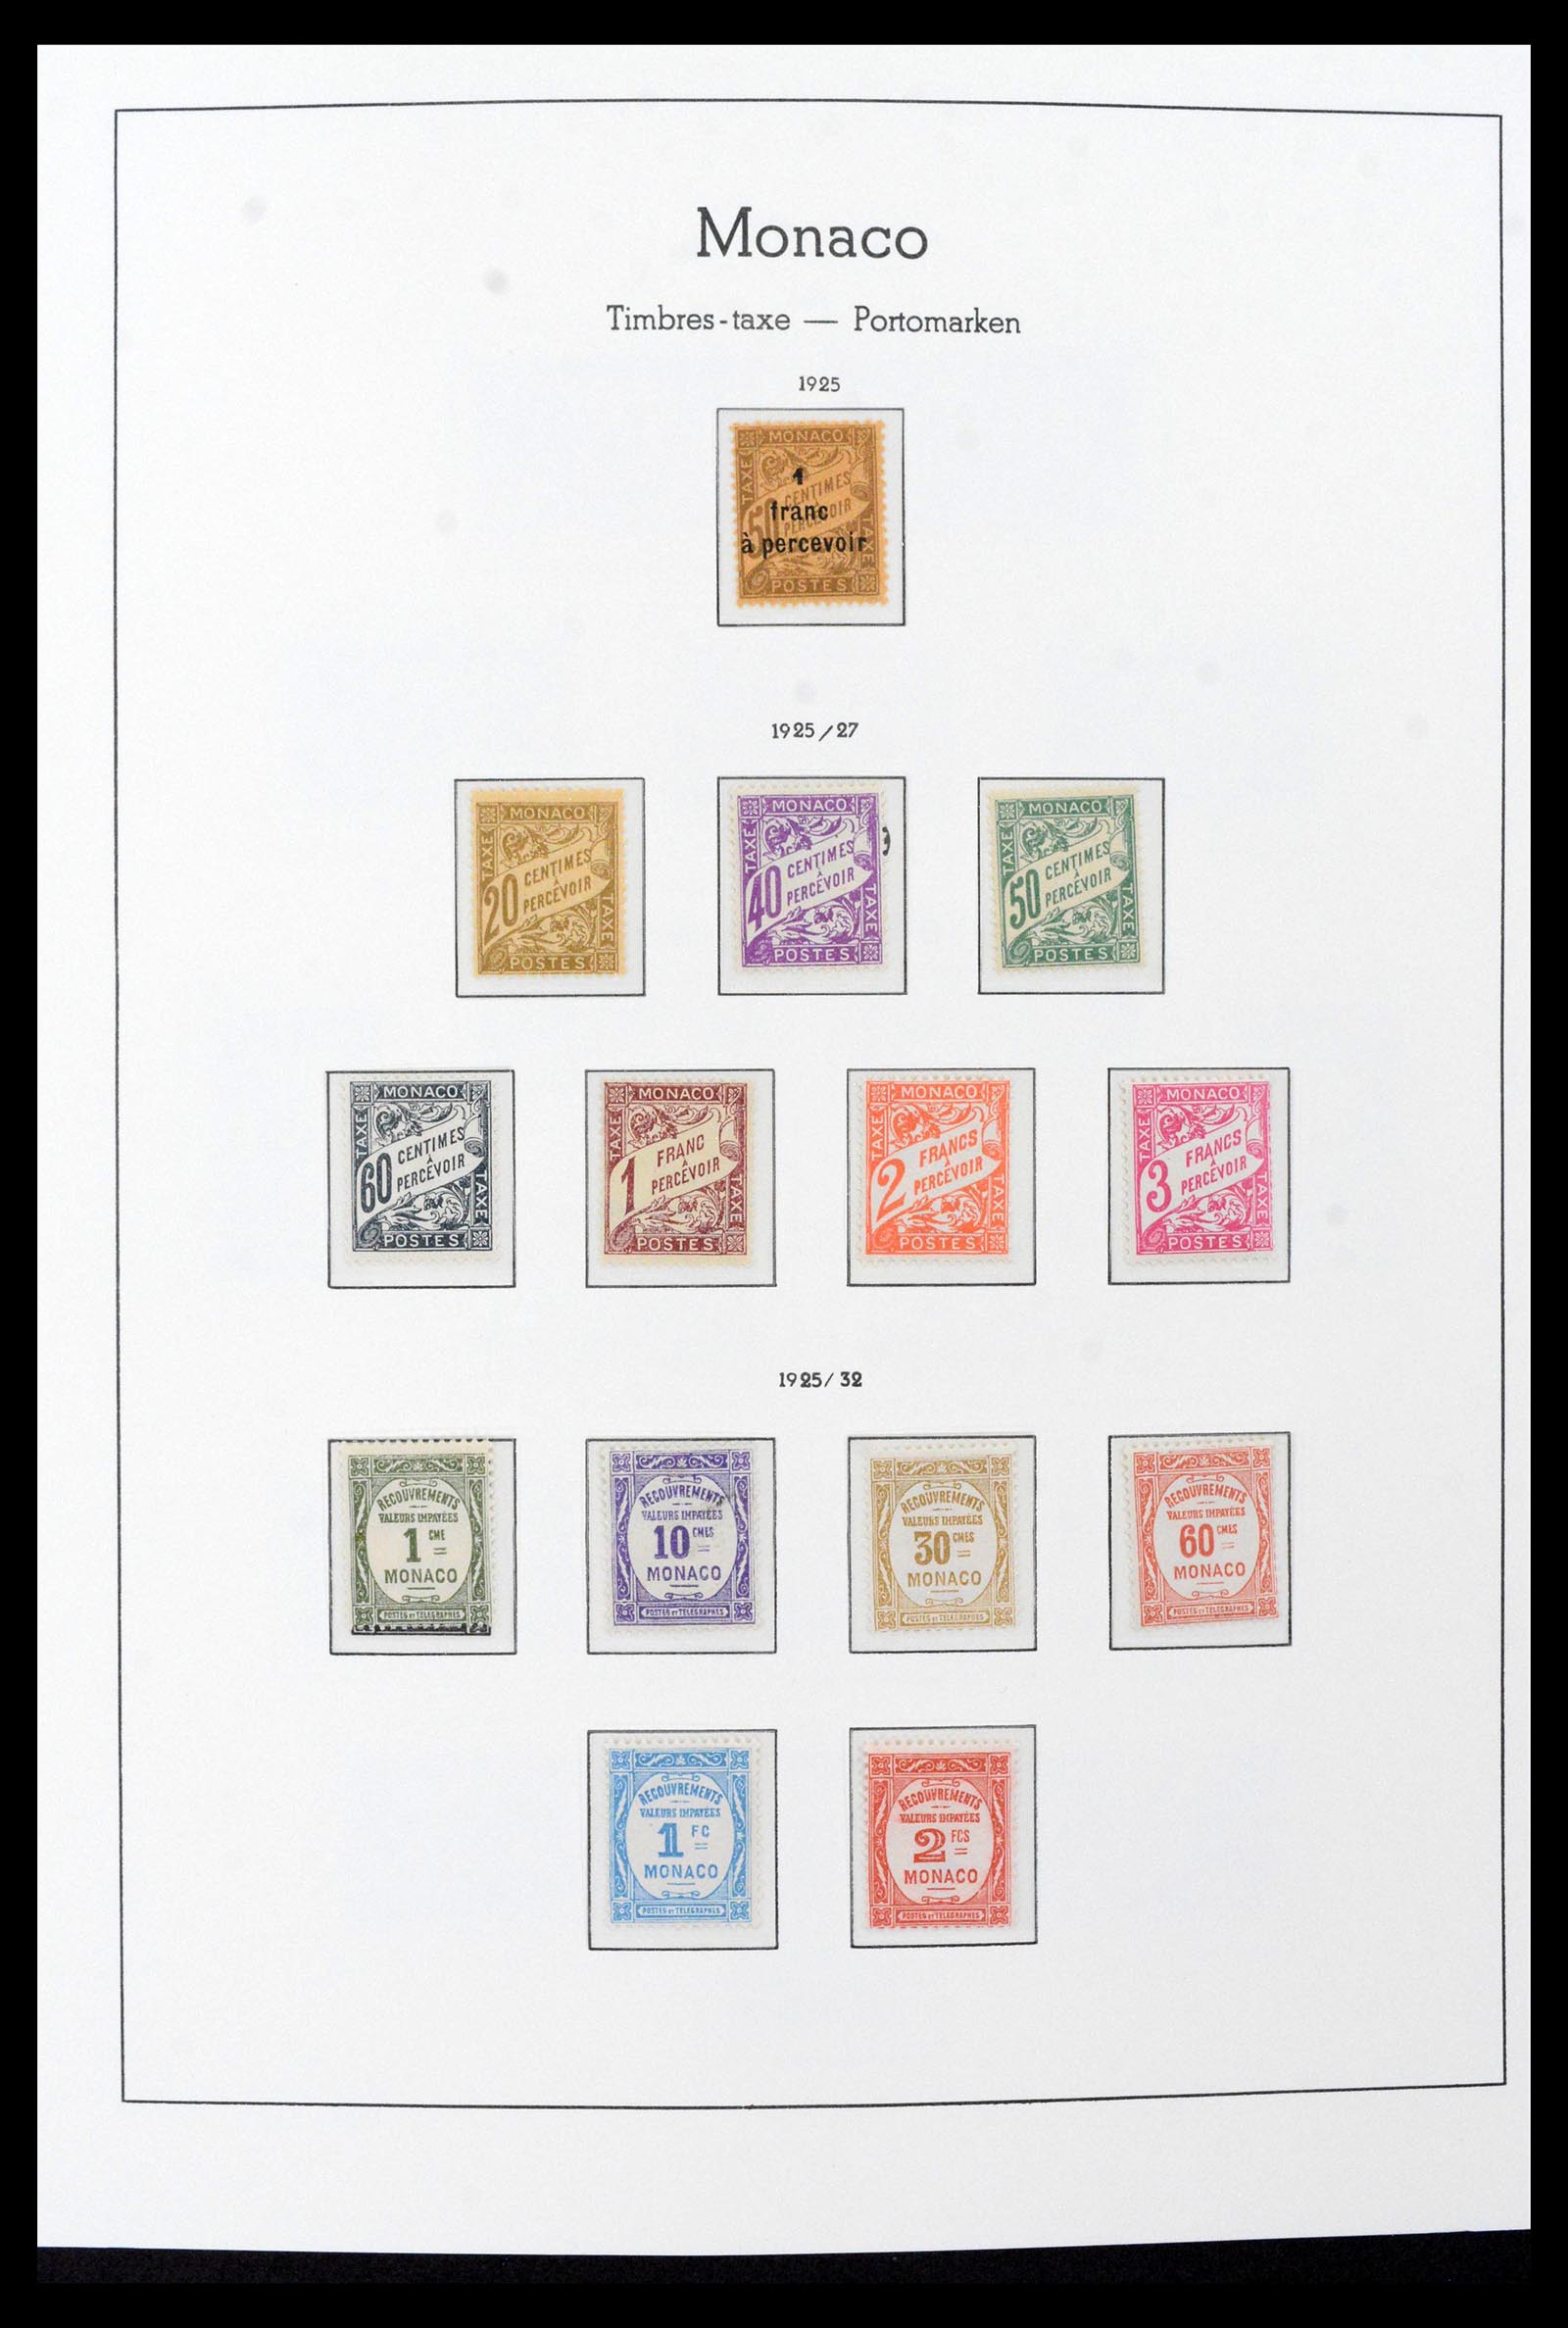 39390 0011 - Stamp collection 39390 Monaco complete 1885-1990.